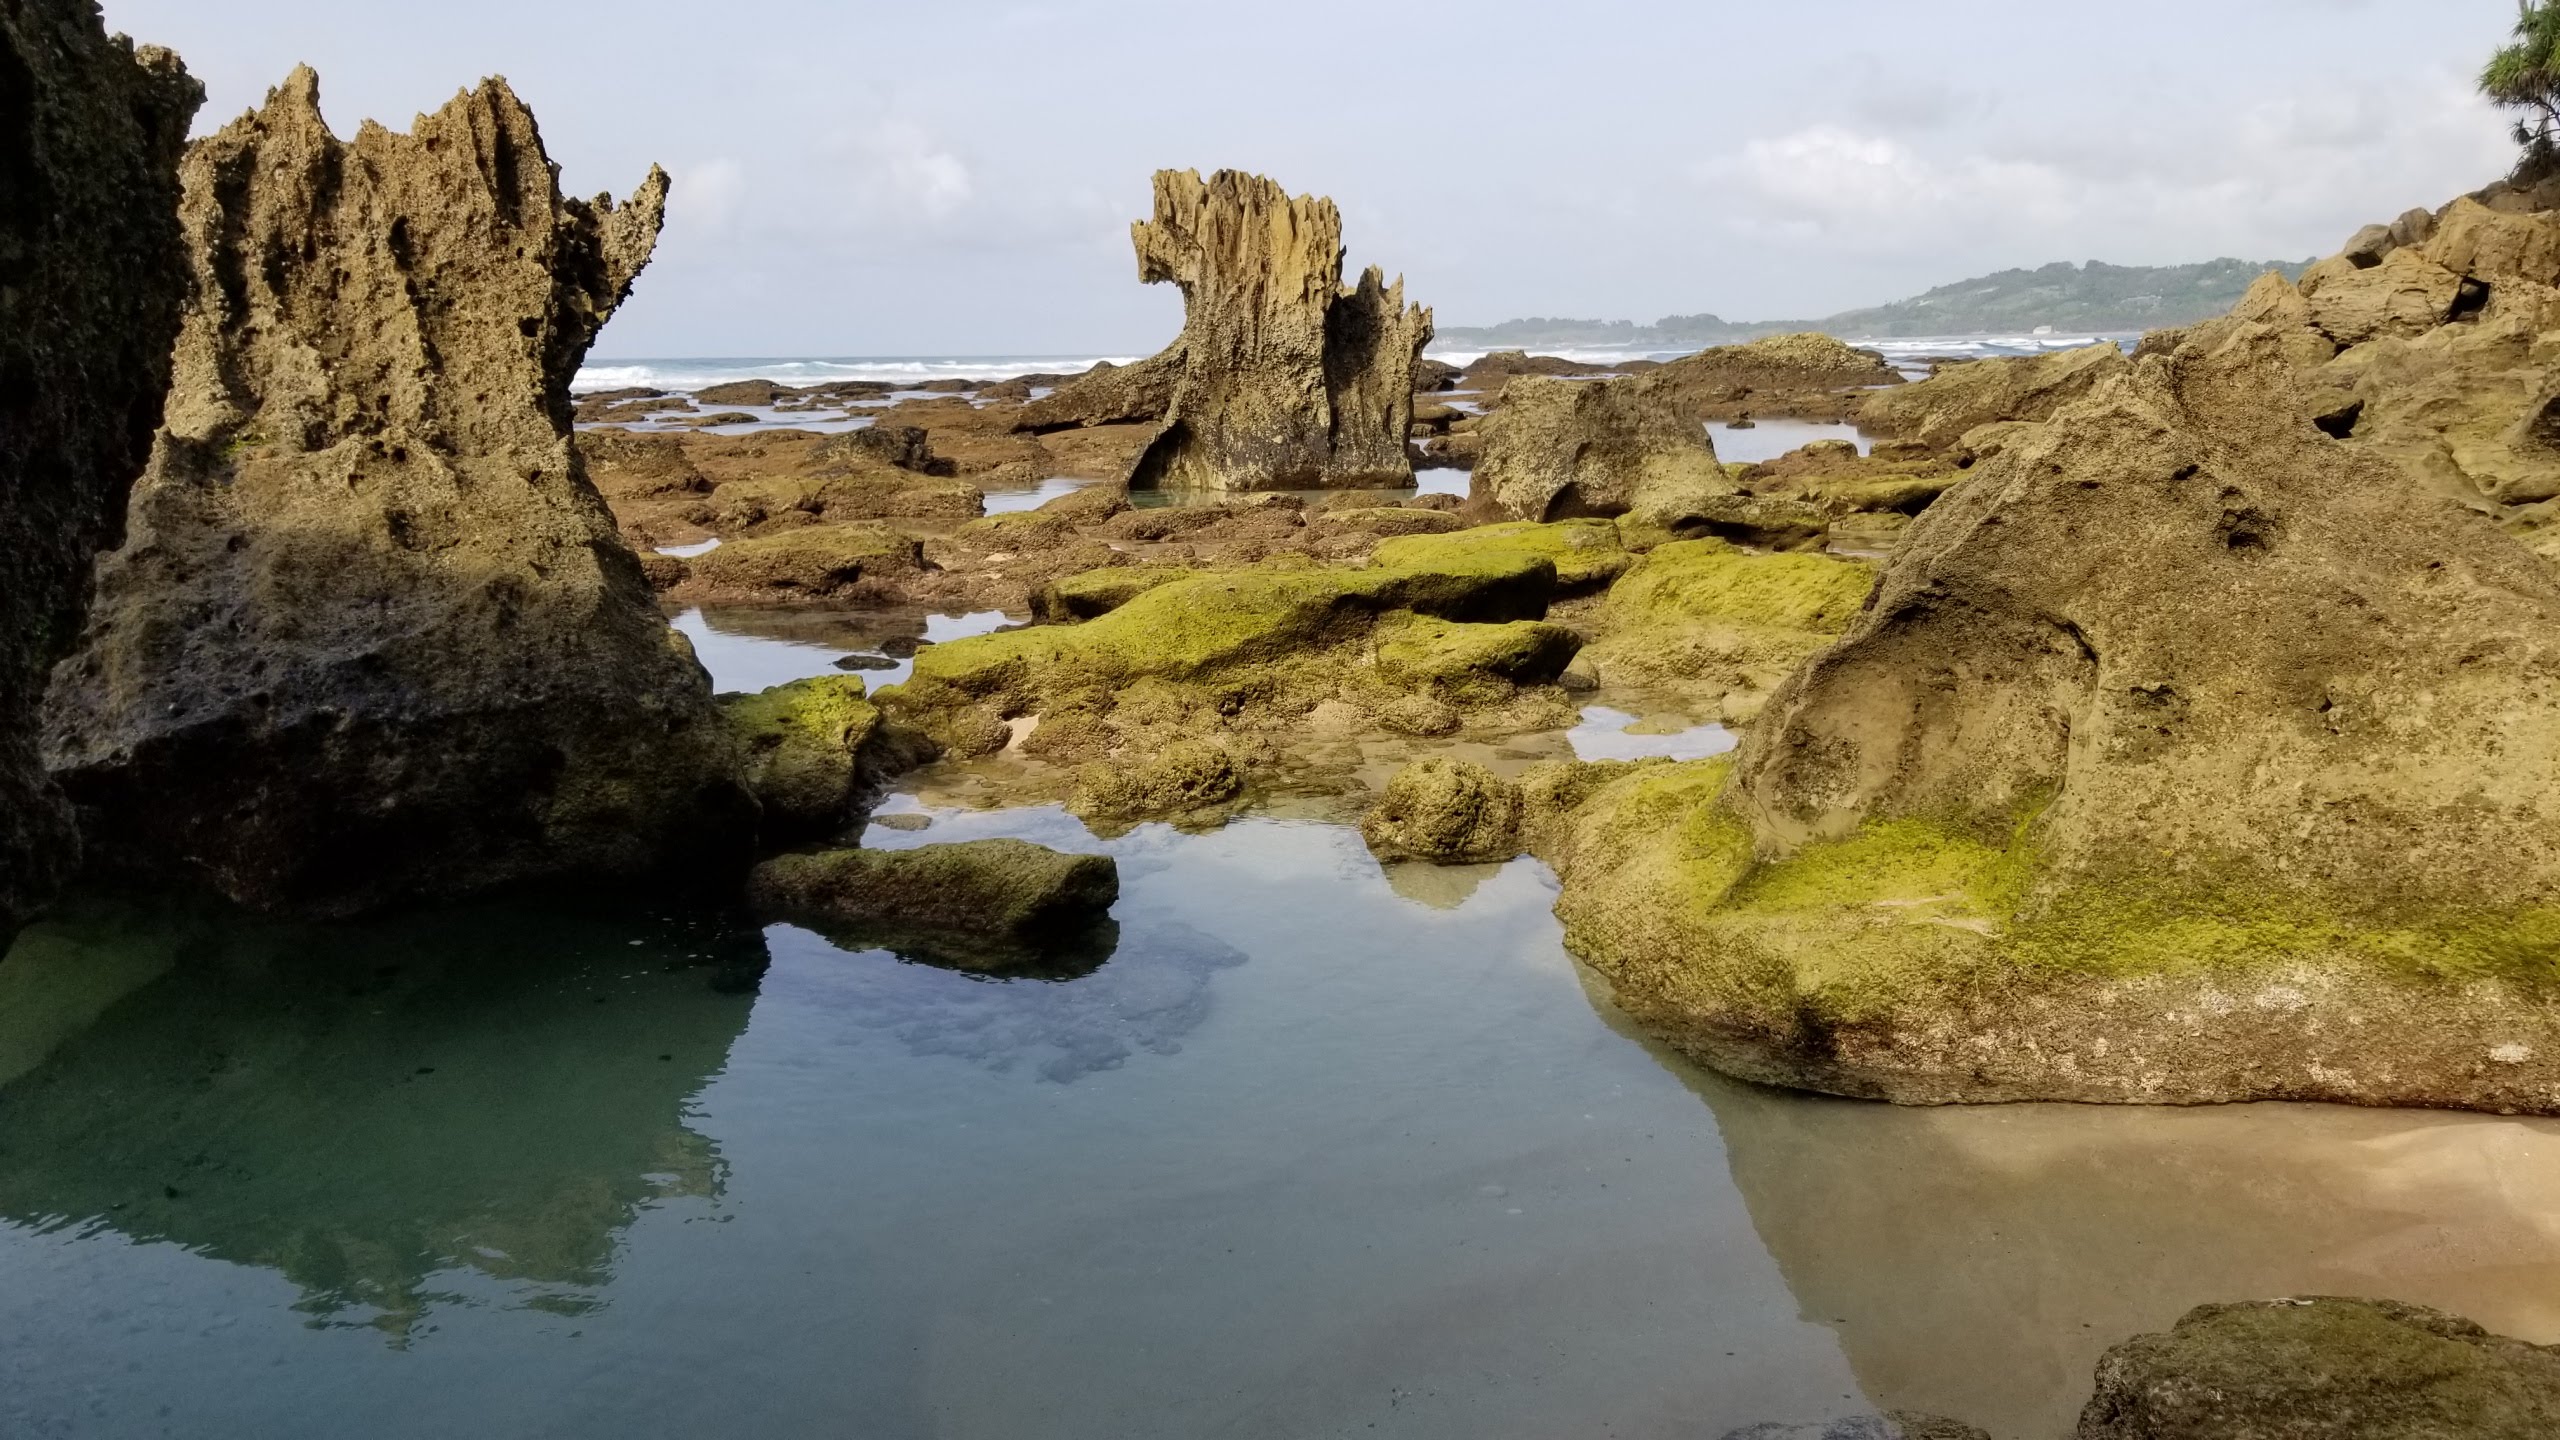 Water pools by the rock formations at the end of the beach